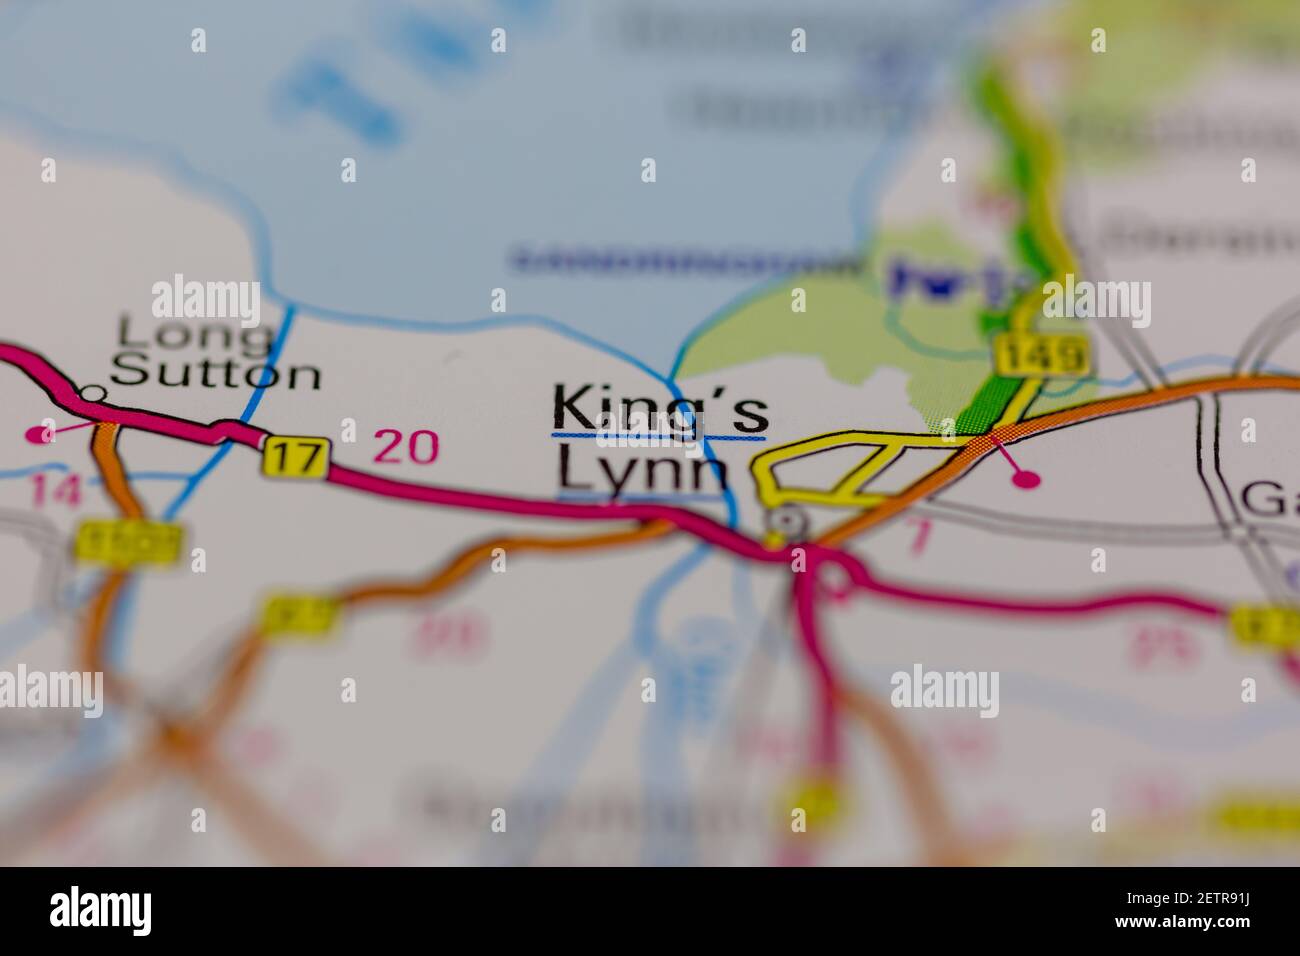 Kings Lynn Shown on a road map or Geography map and atlas Stock Photo